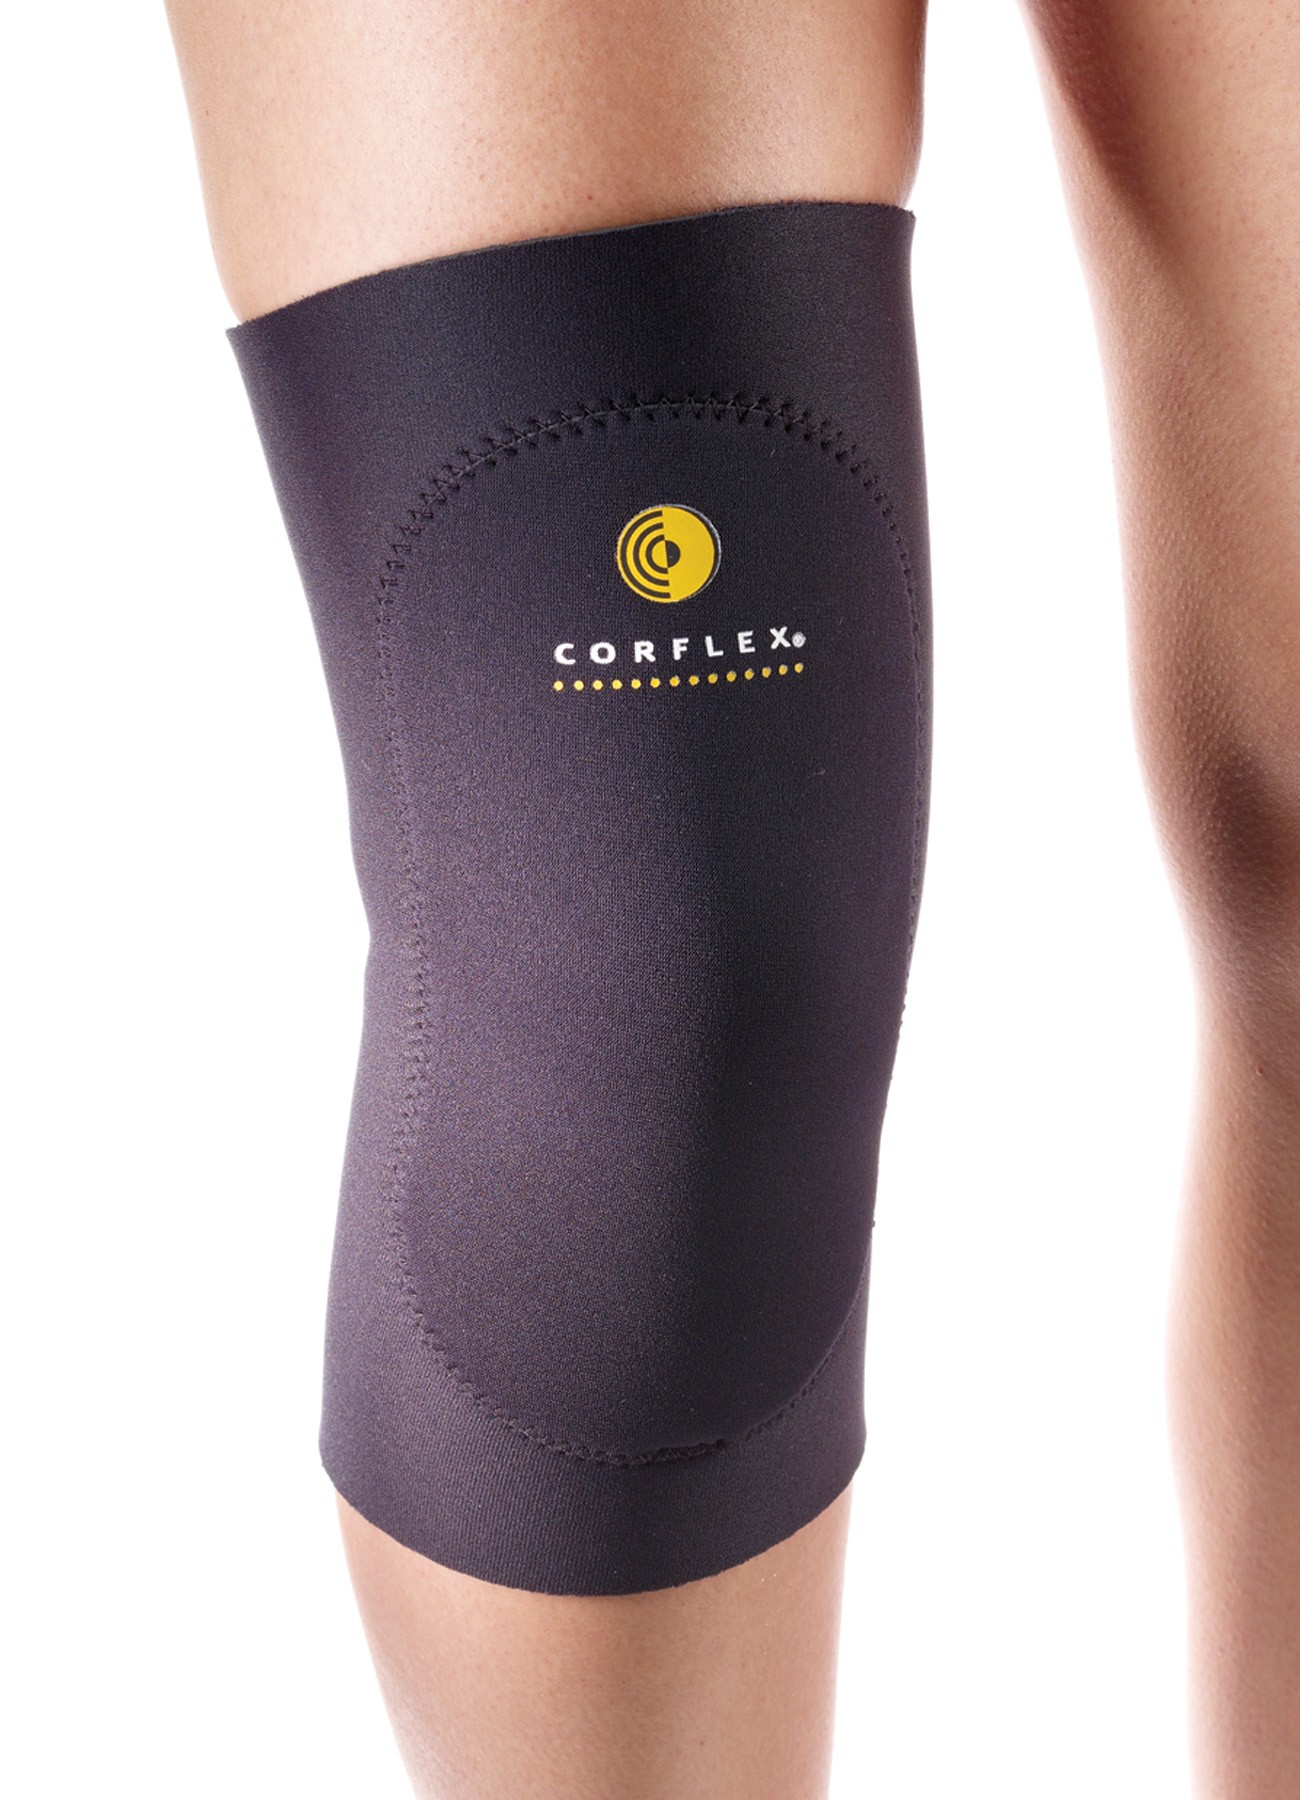 Corflex® Neoprene Knee Sleeve with Anterior Pad - Advent Medical Systems